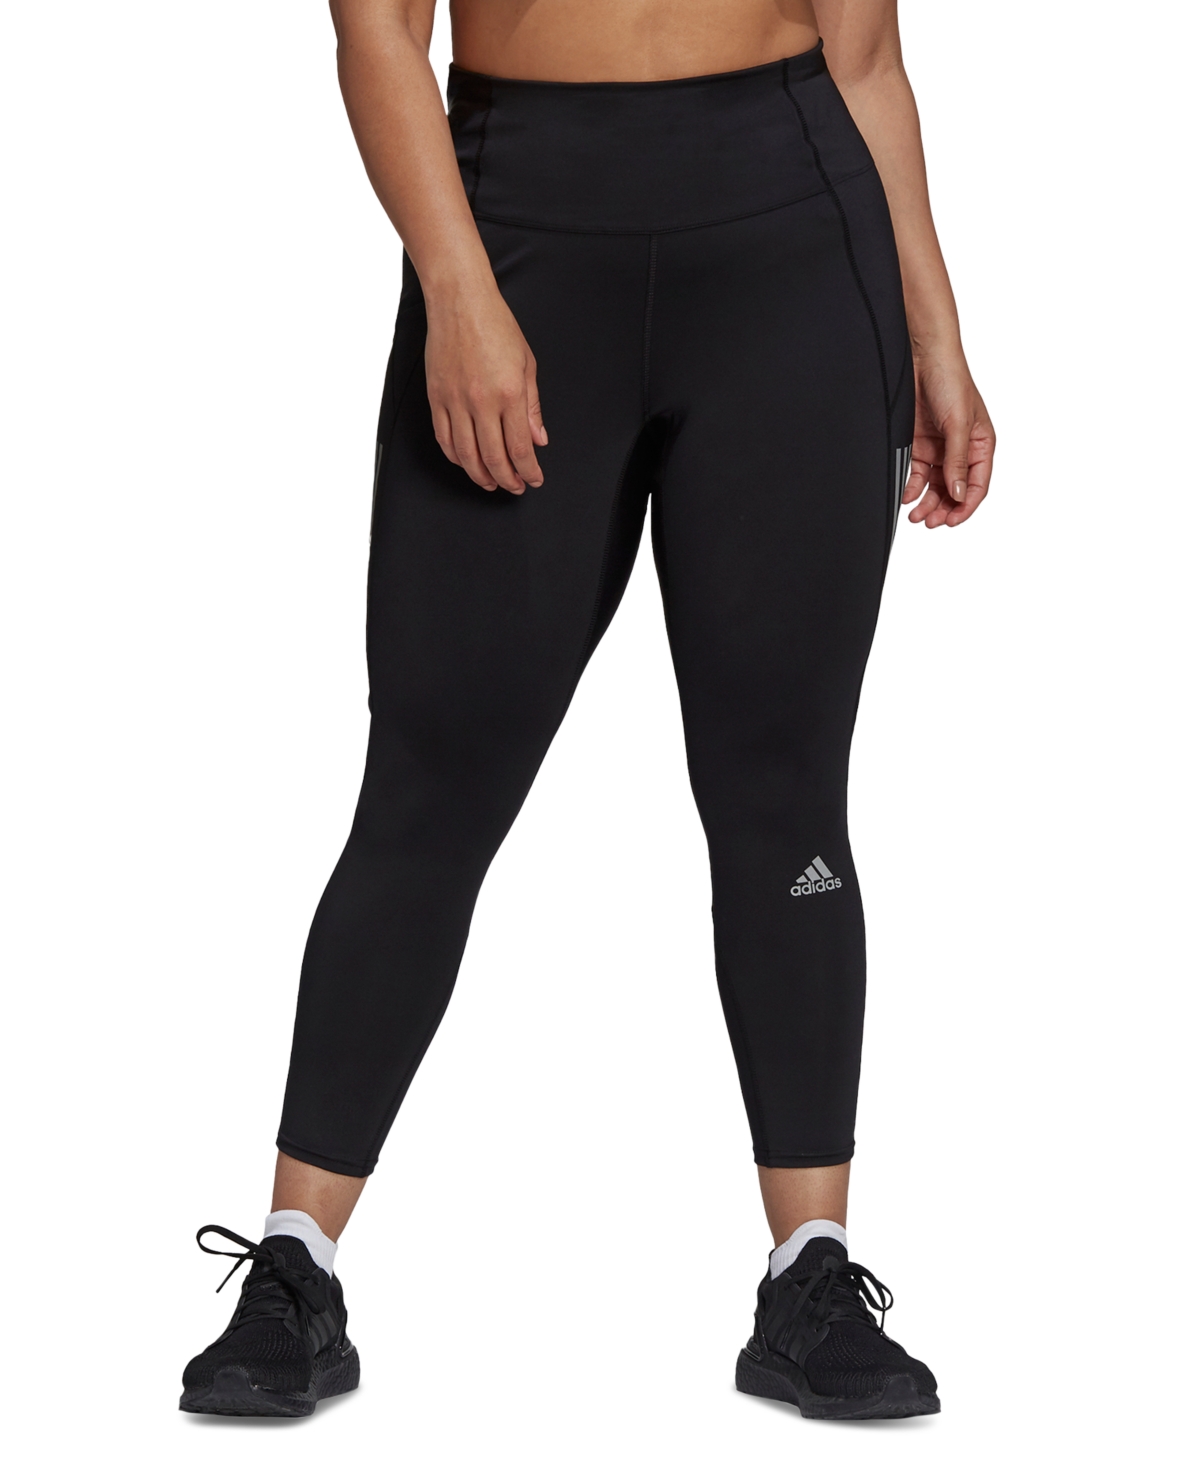  adidas Plus Size Own The Run 7/8 Tights